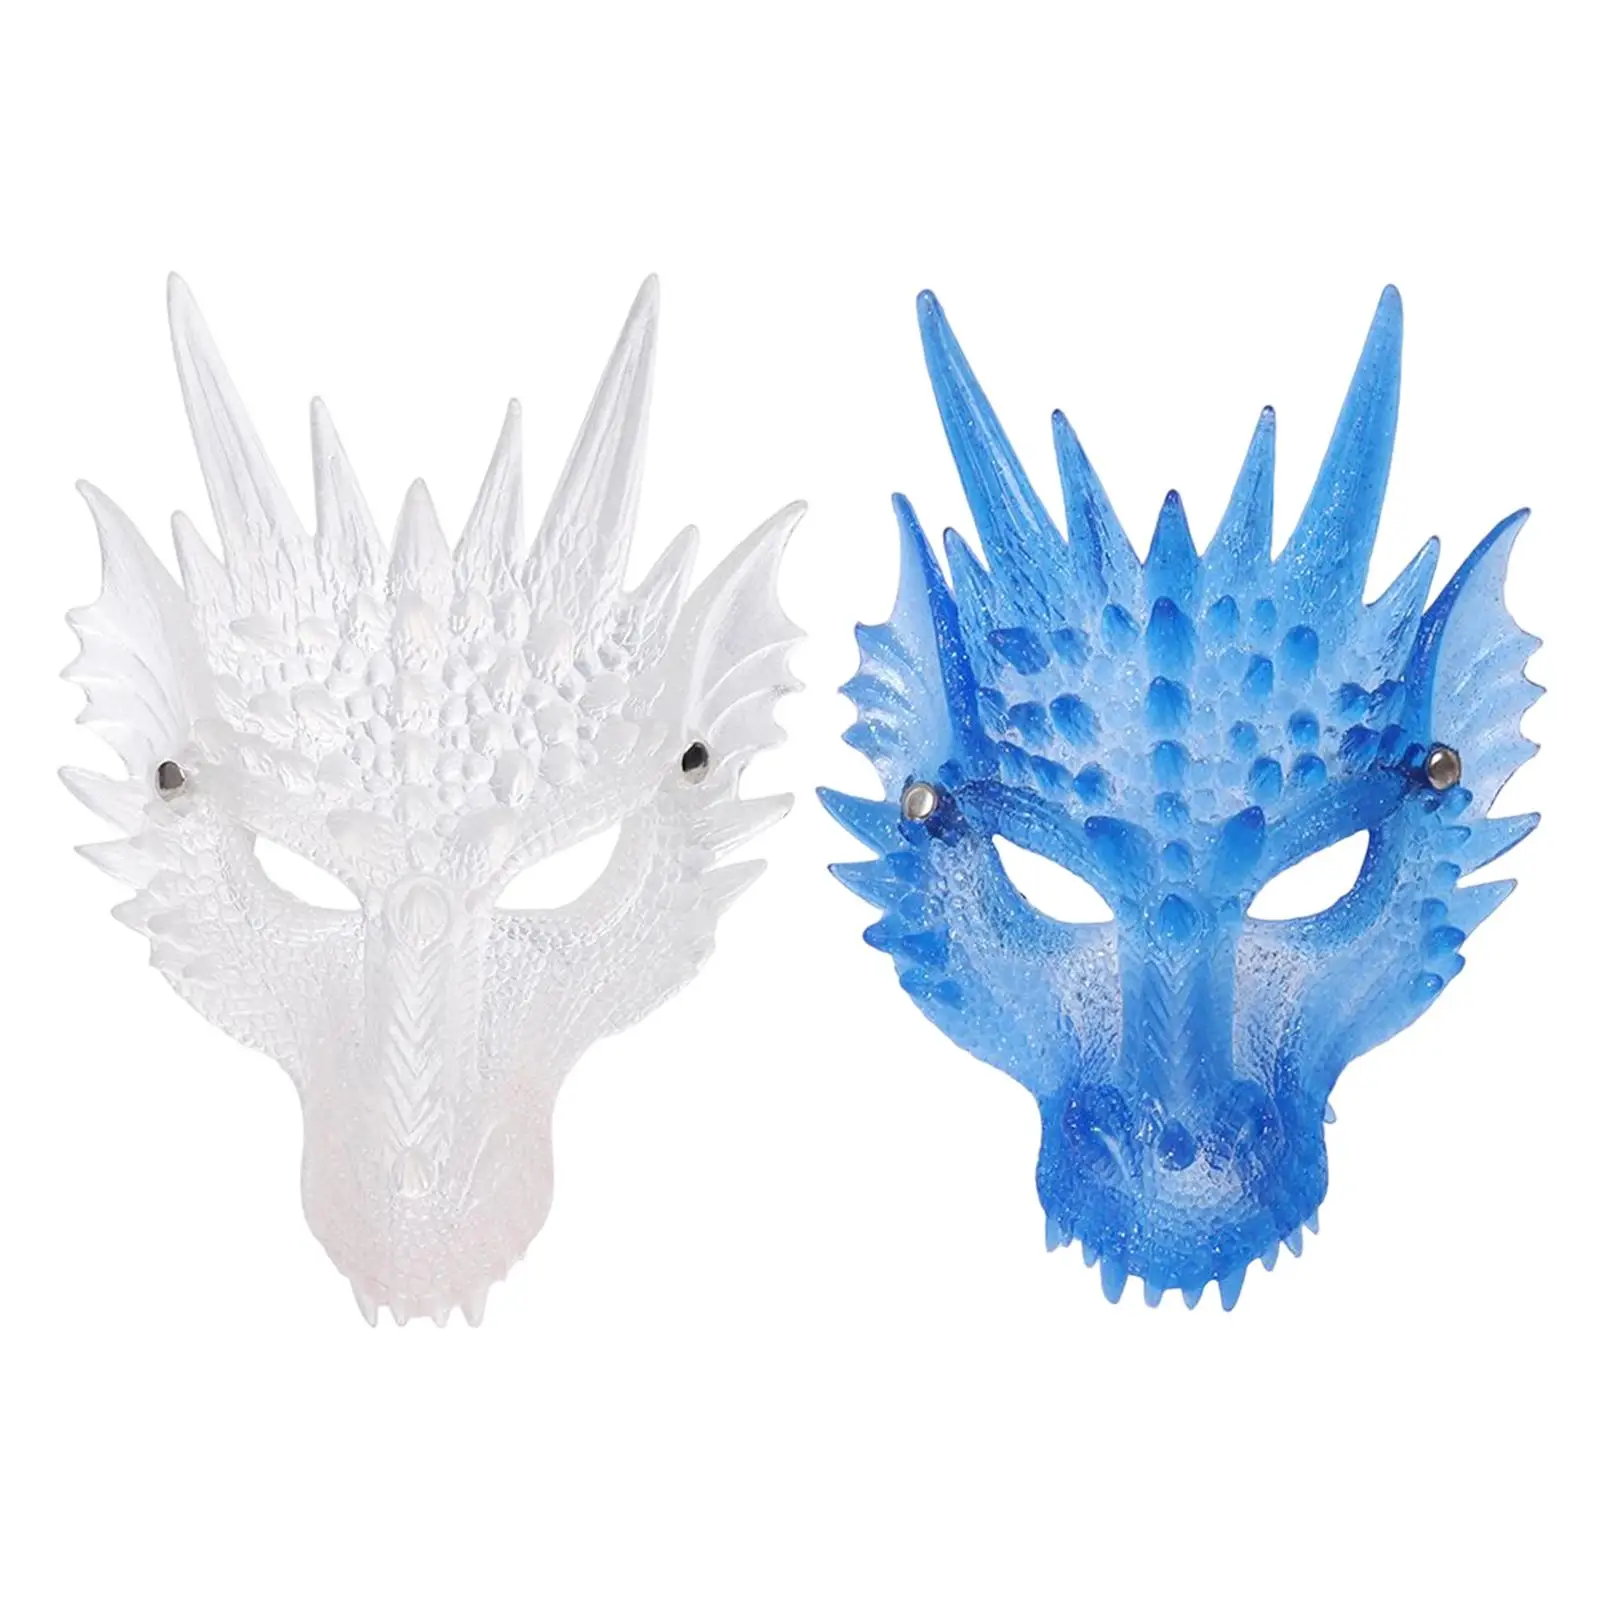 Scary Dragon Masks Adults Face Cover Animal Mask for Wedding Masquerade Halloween Party Photo Prop